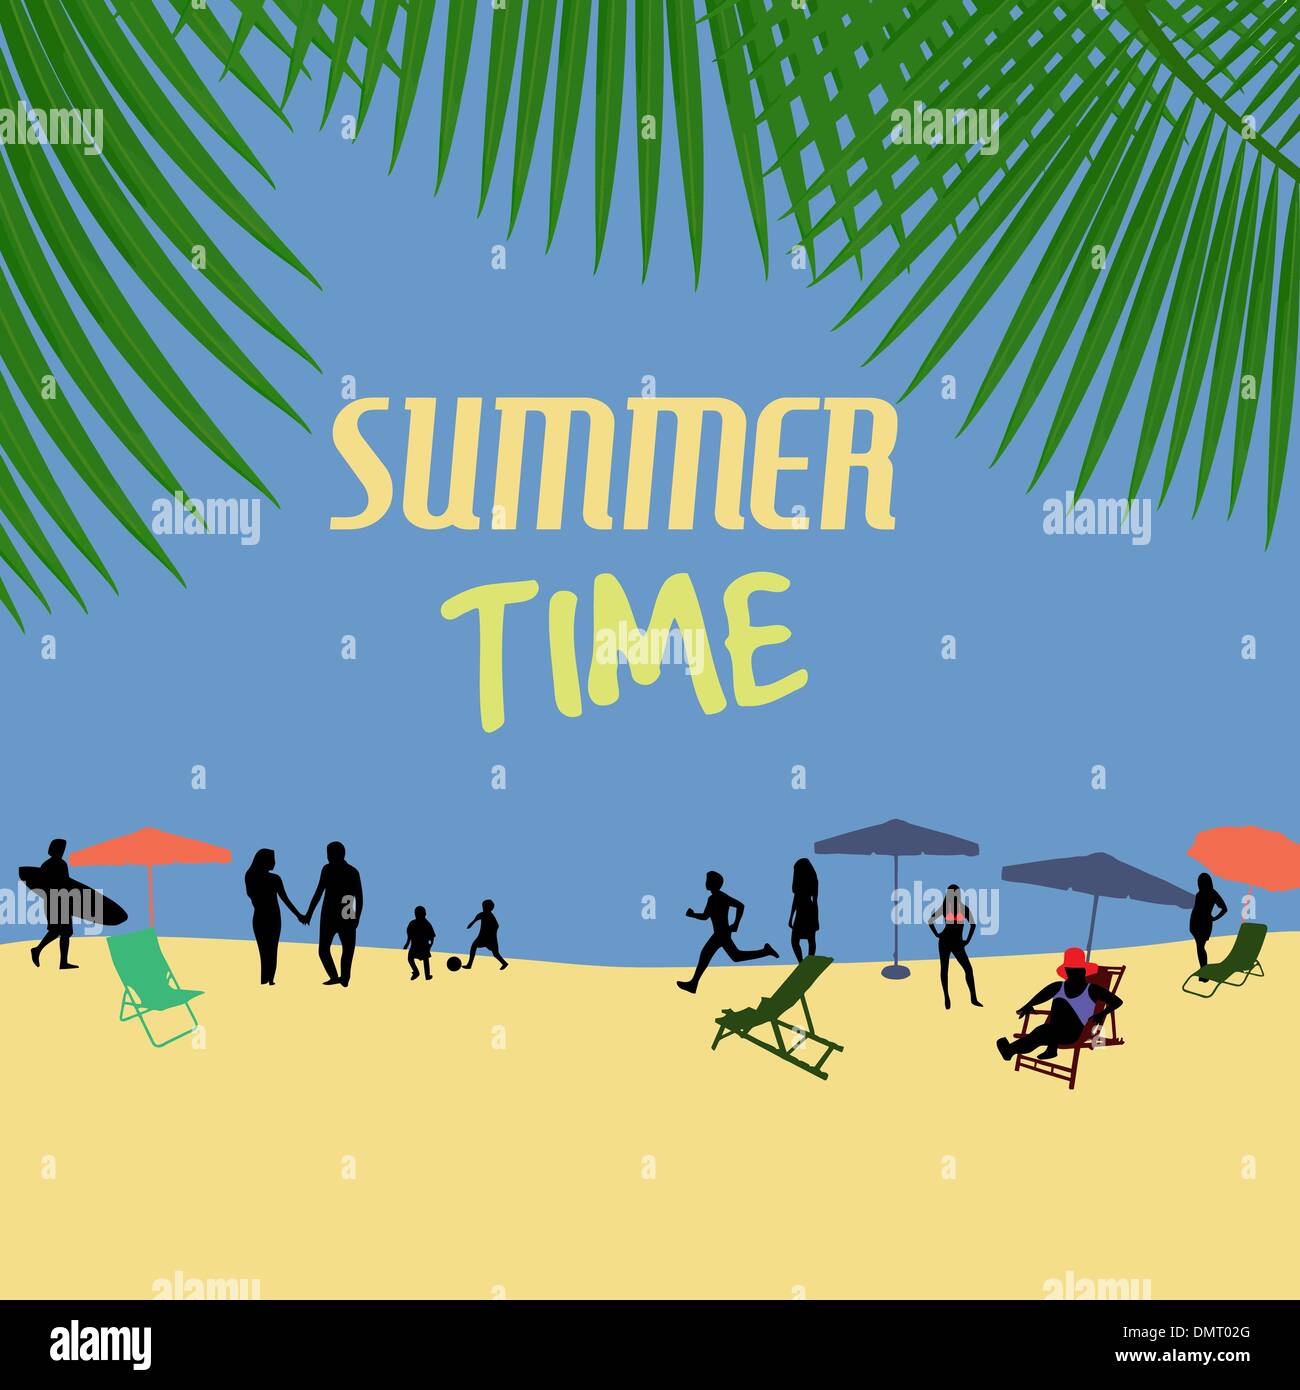 Summer time poster Stock Vector